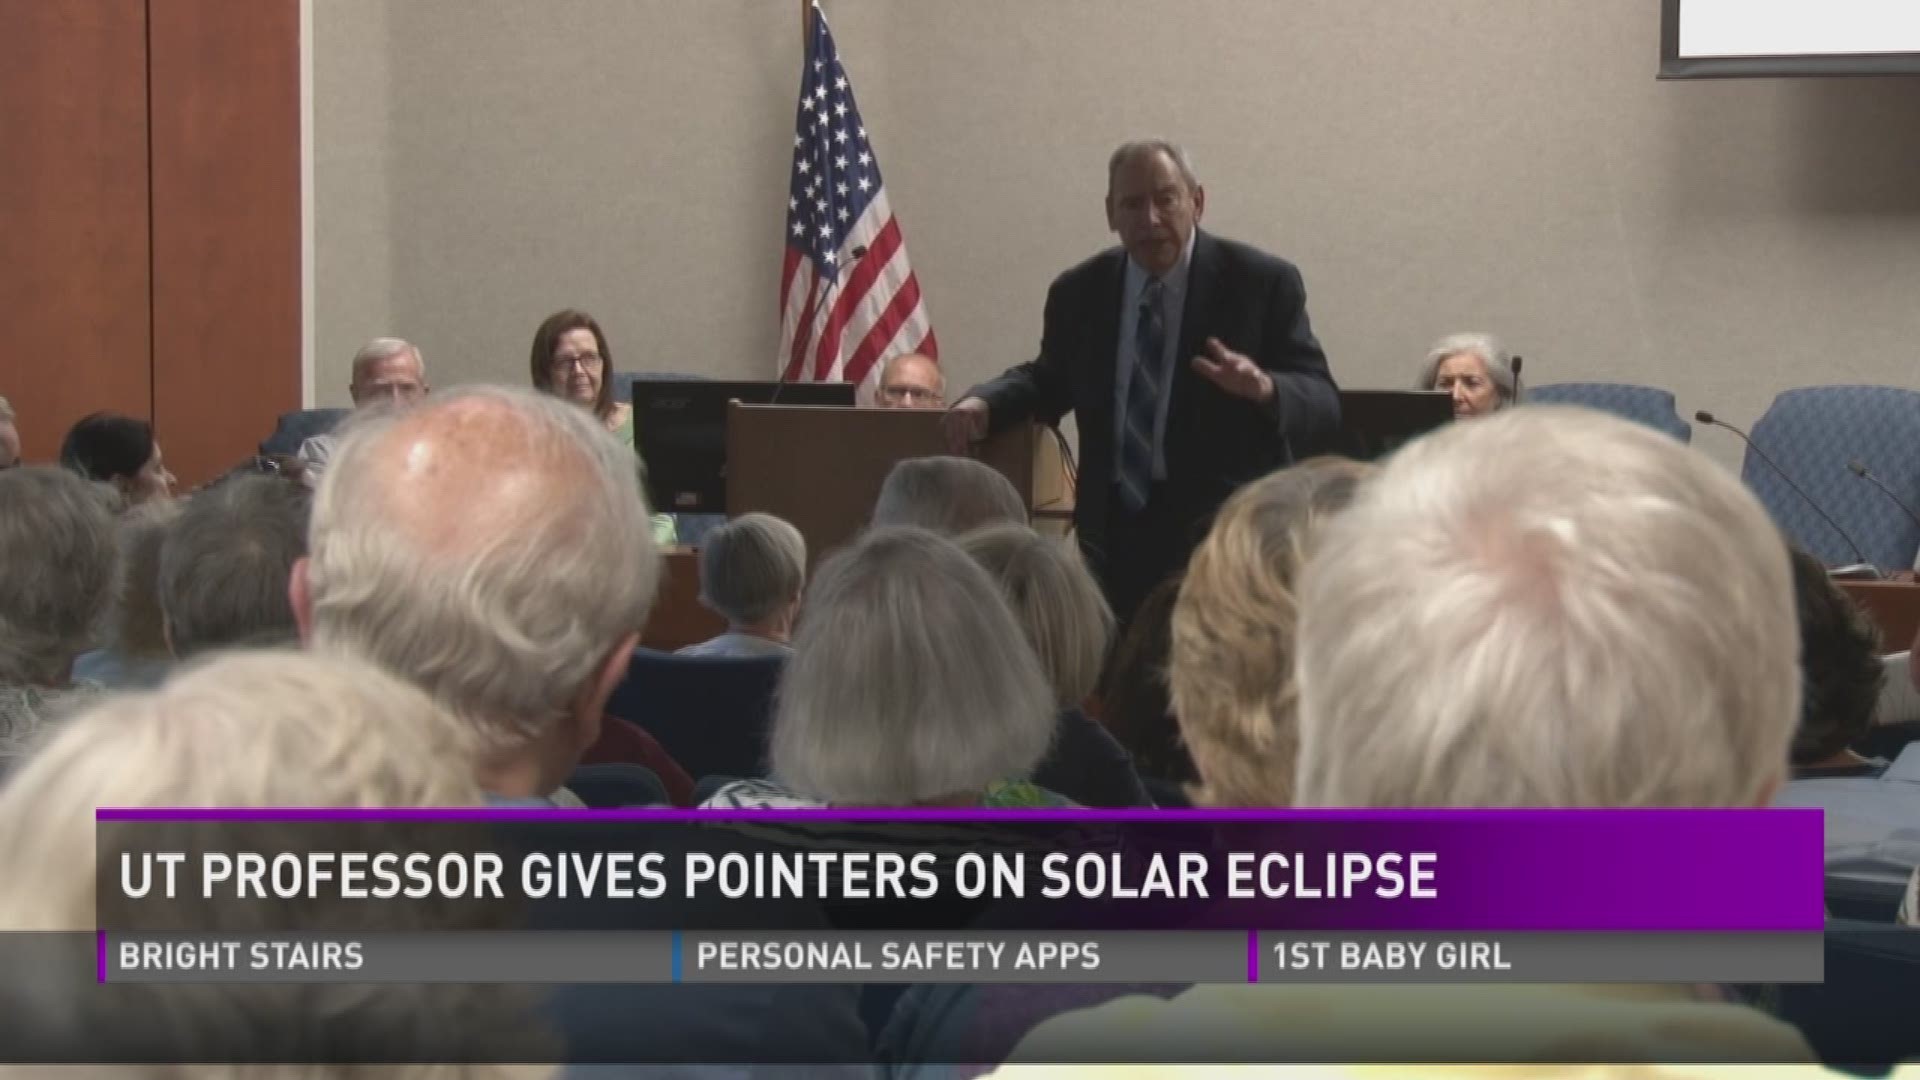 July 12, 2017: University of Tennessee professor Mark Littman spoke at a Farragut Town Hall about the best way to enjoy the total solar eclipse on Aug. 21.